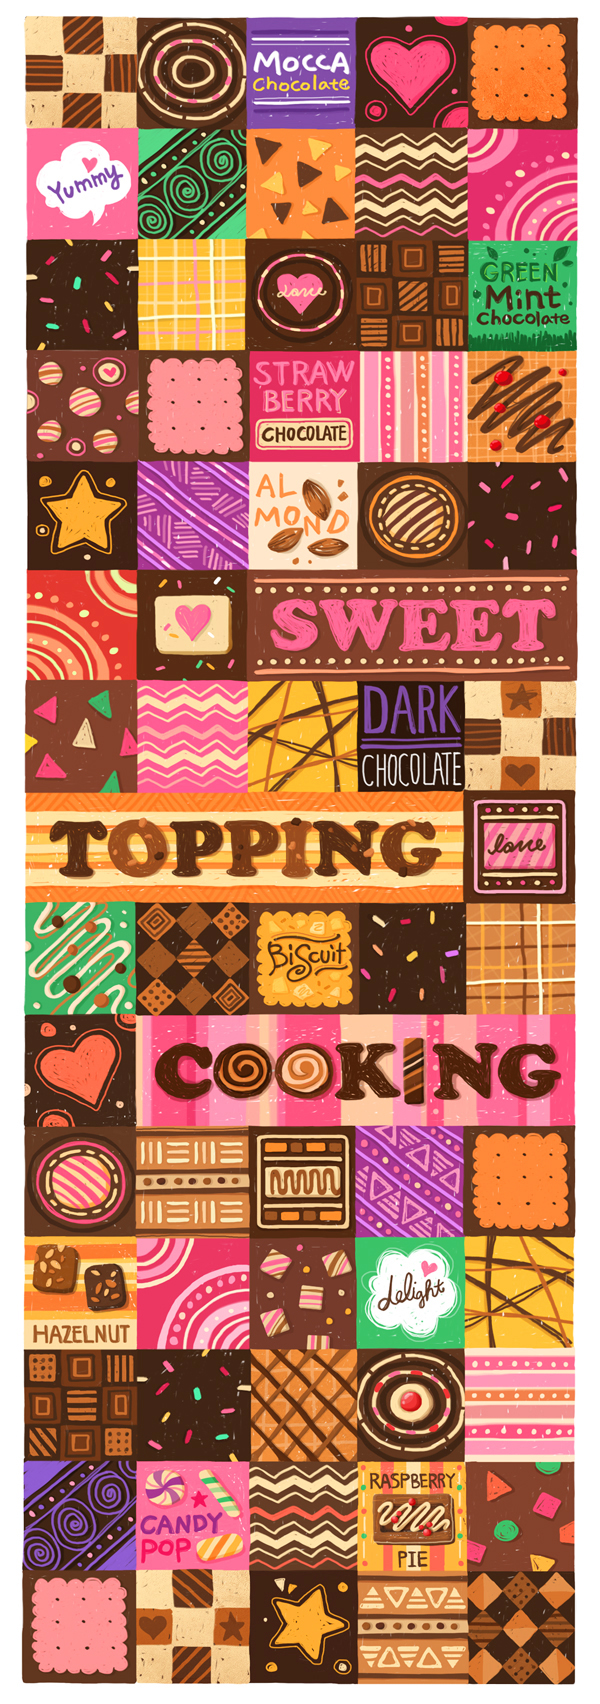 Sweet Topping Cooking design recipe Cooky YOON design graphic pattern